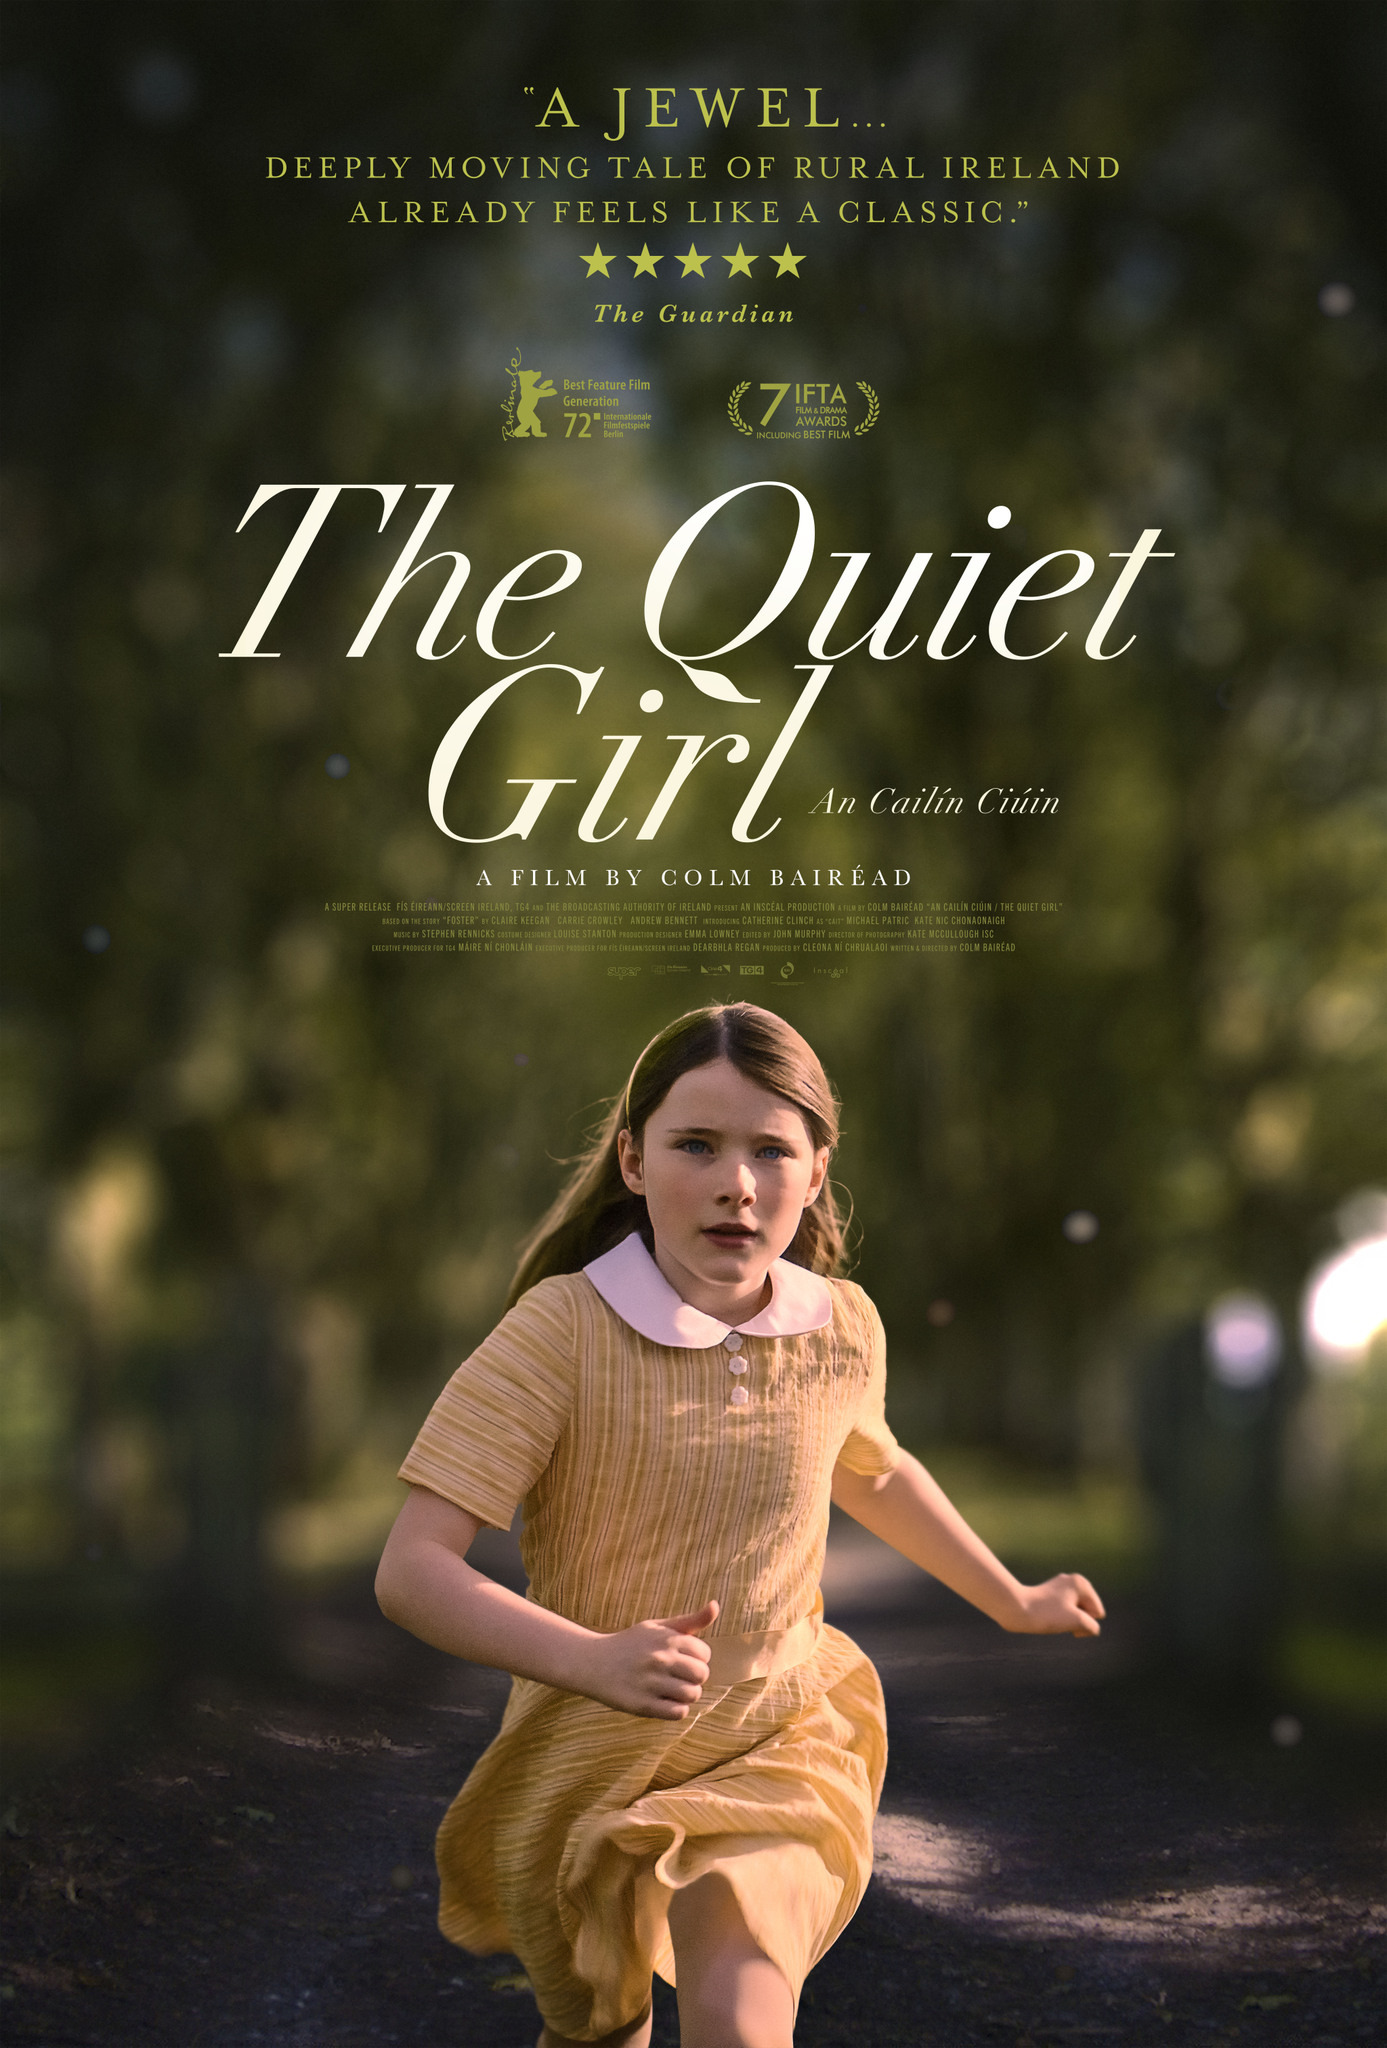 The Quiet Girl (directed by Colm Bairéad)